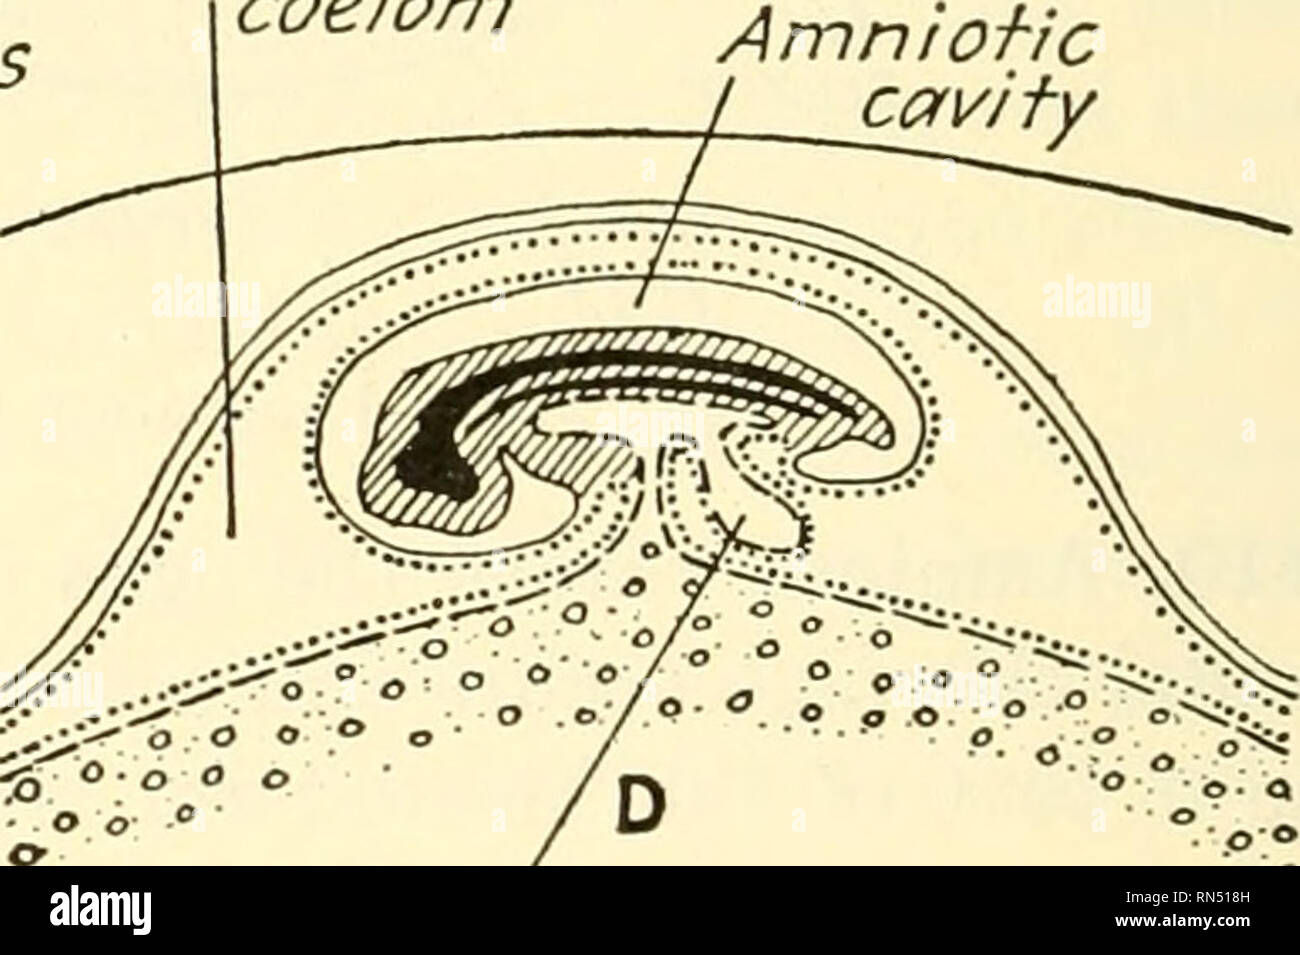 . Animal biology. Zoology; Biology. Extra-embryonic coelom Amniotic cavity Yolk stalk. O o' *&gt; ^' o. o o o ? 00&quot; Allahtois Fig. 270.—^Diagrams of the development of a bird's egg. A, cross section of an amphibian embryo for comparison with 5, which is a cross section of an avian embryo at an early stage. C, D, and E, stages in the development of amnion and allantois in the bird, shown in longitudinal section. Ectoderm is shown in C, D, and £ by a solid line, entoderm by dashes, mesoderm in mass by crosslines, and somatic mesoderm and splanchnic mesoderm by dots. 411. Allantois.—Since th Stock Photo